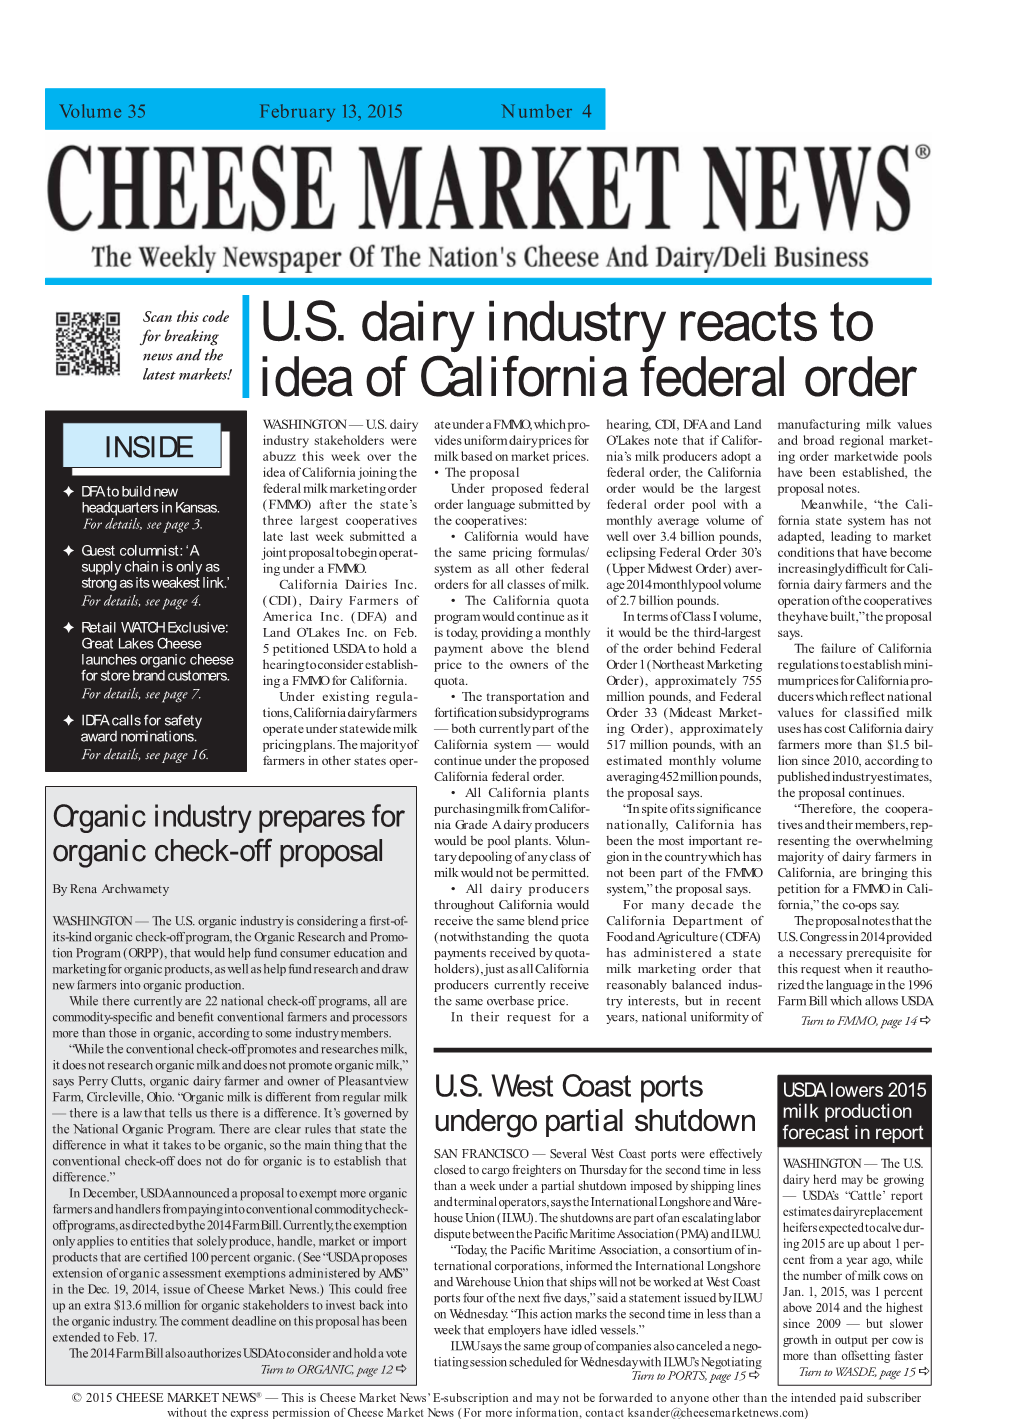 U.S. Dairy Industry Reacts to Idea of California Federal Order